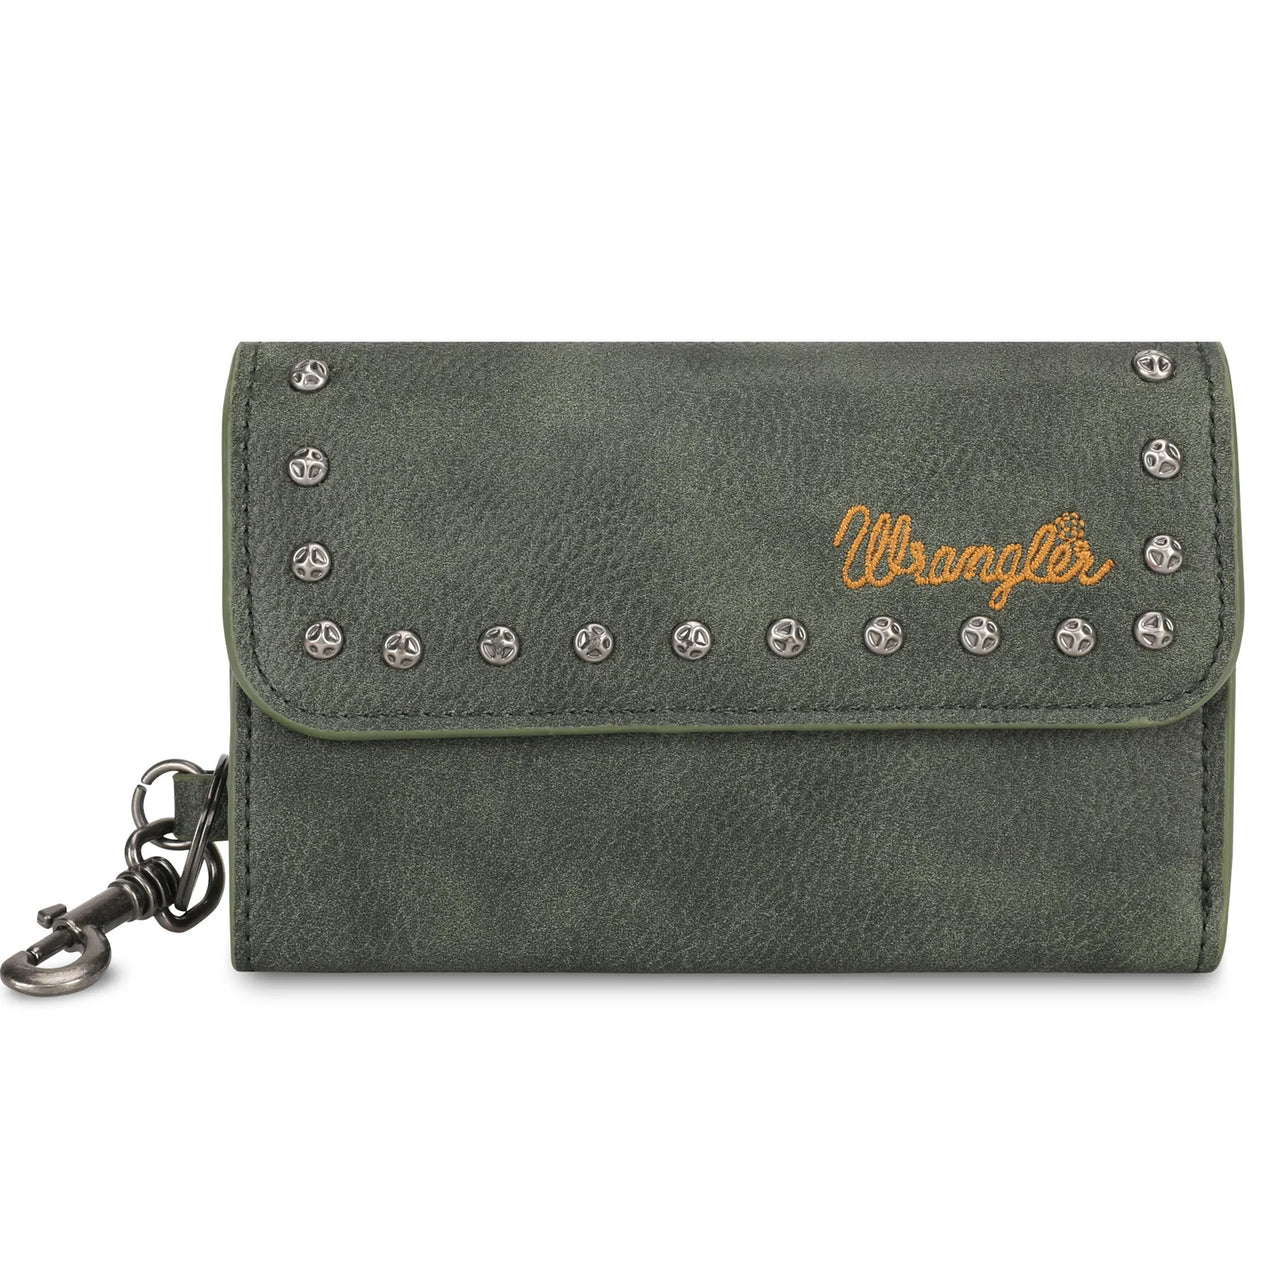 Wrangler Studded Accents Tri-Fold Keychain Wallet - Green